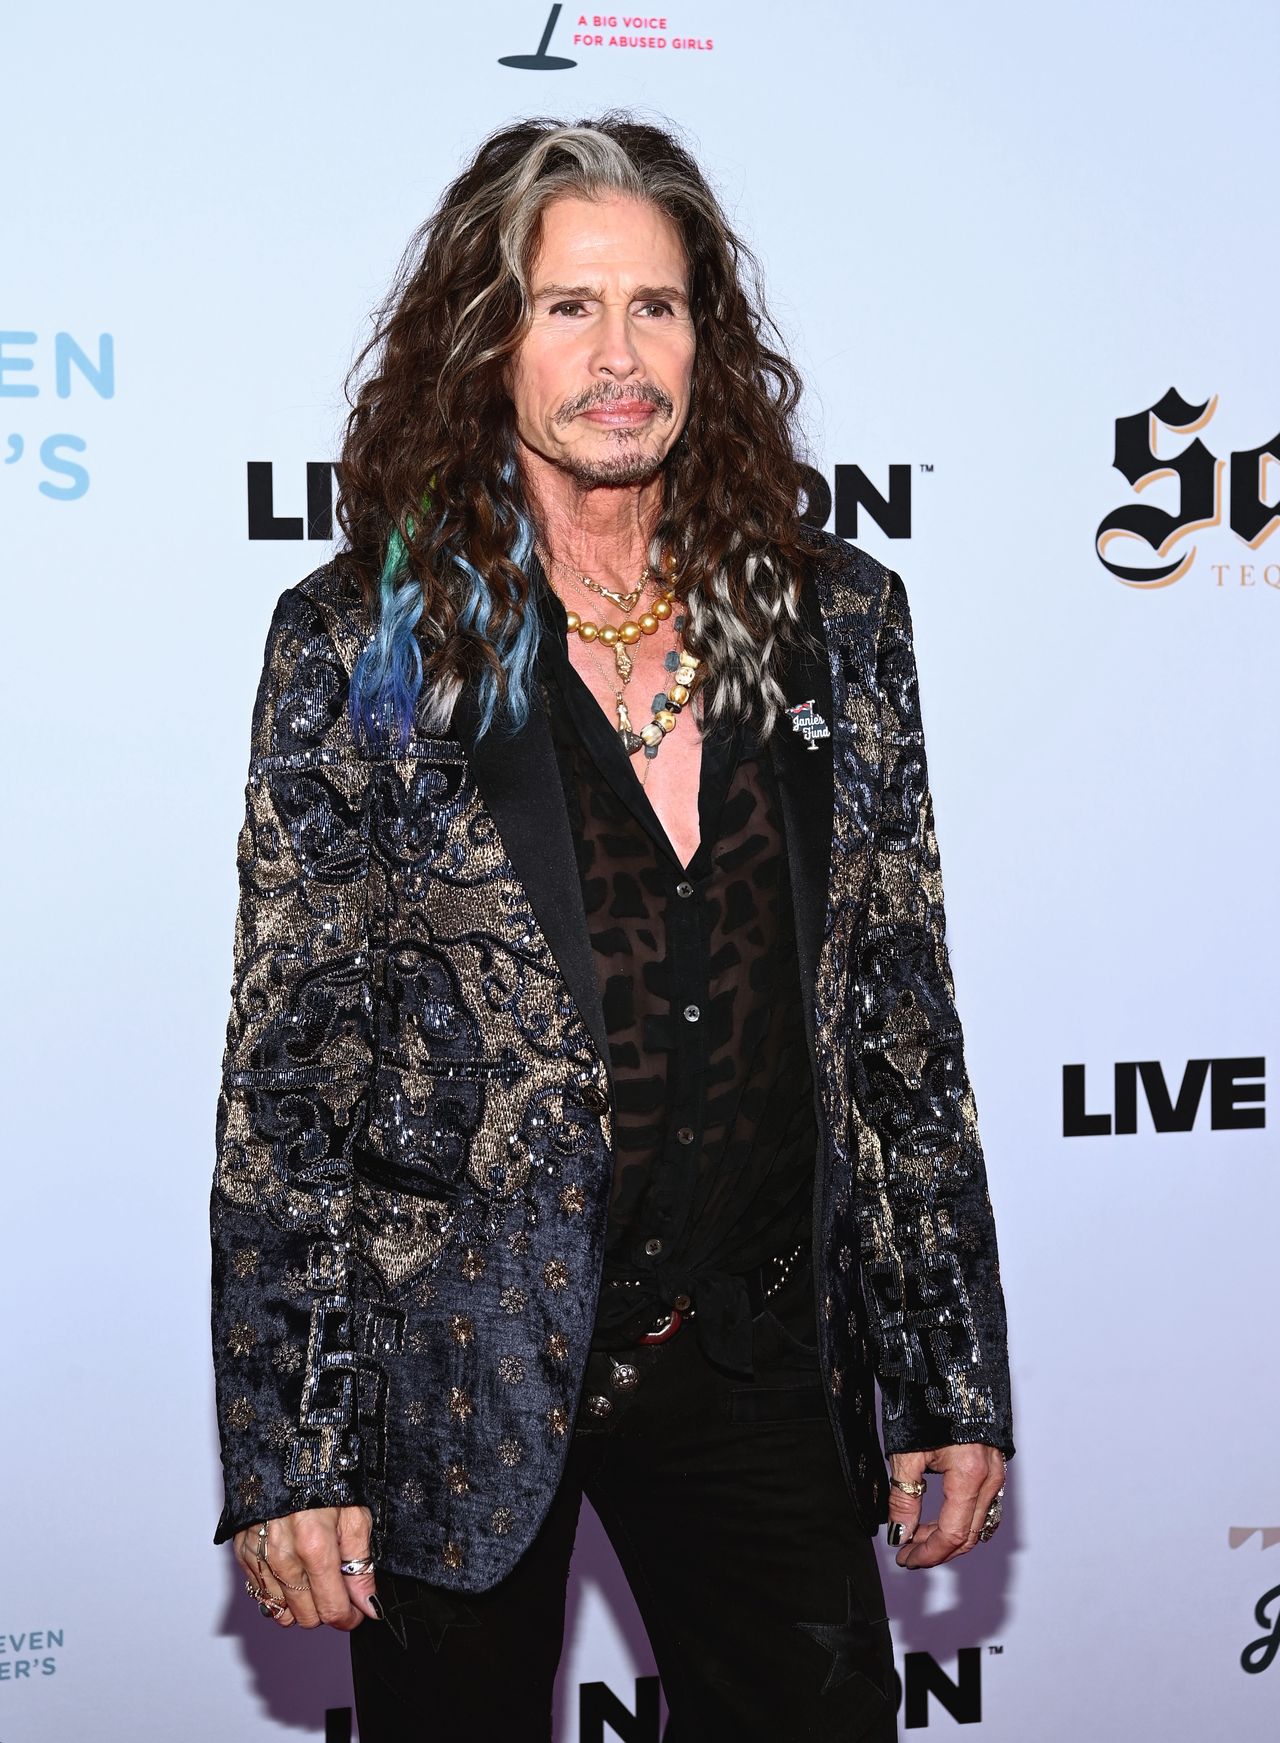 5th Jam For Janie Grammy Awards Viewing Party Presented by Live Nation
LOS ANGELES, CALIFORNIA - FEBRUARY 04: Steven Tyler attends the Jam for Janie GRAMMY Awards Viewing Party presented by Live Nation at Hollywood Palladium on February 04, 2024 in Los Angeles, California. (Photo by Araya Doheny/Getty Images for Janie's Fund)
Araya Doheny